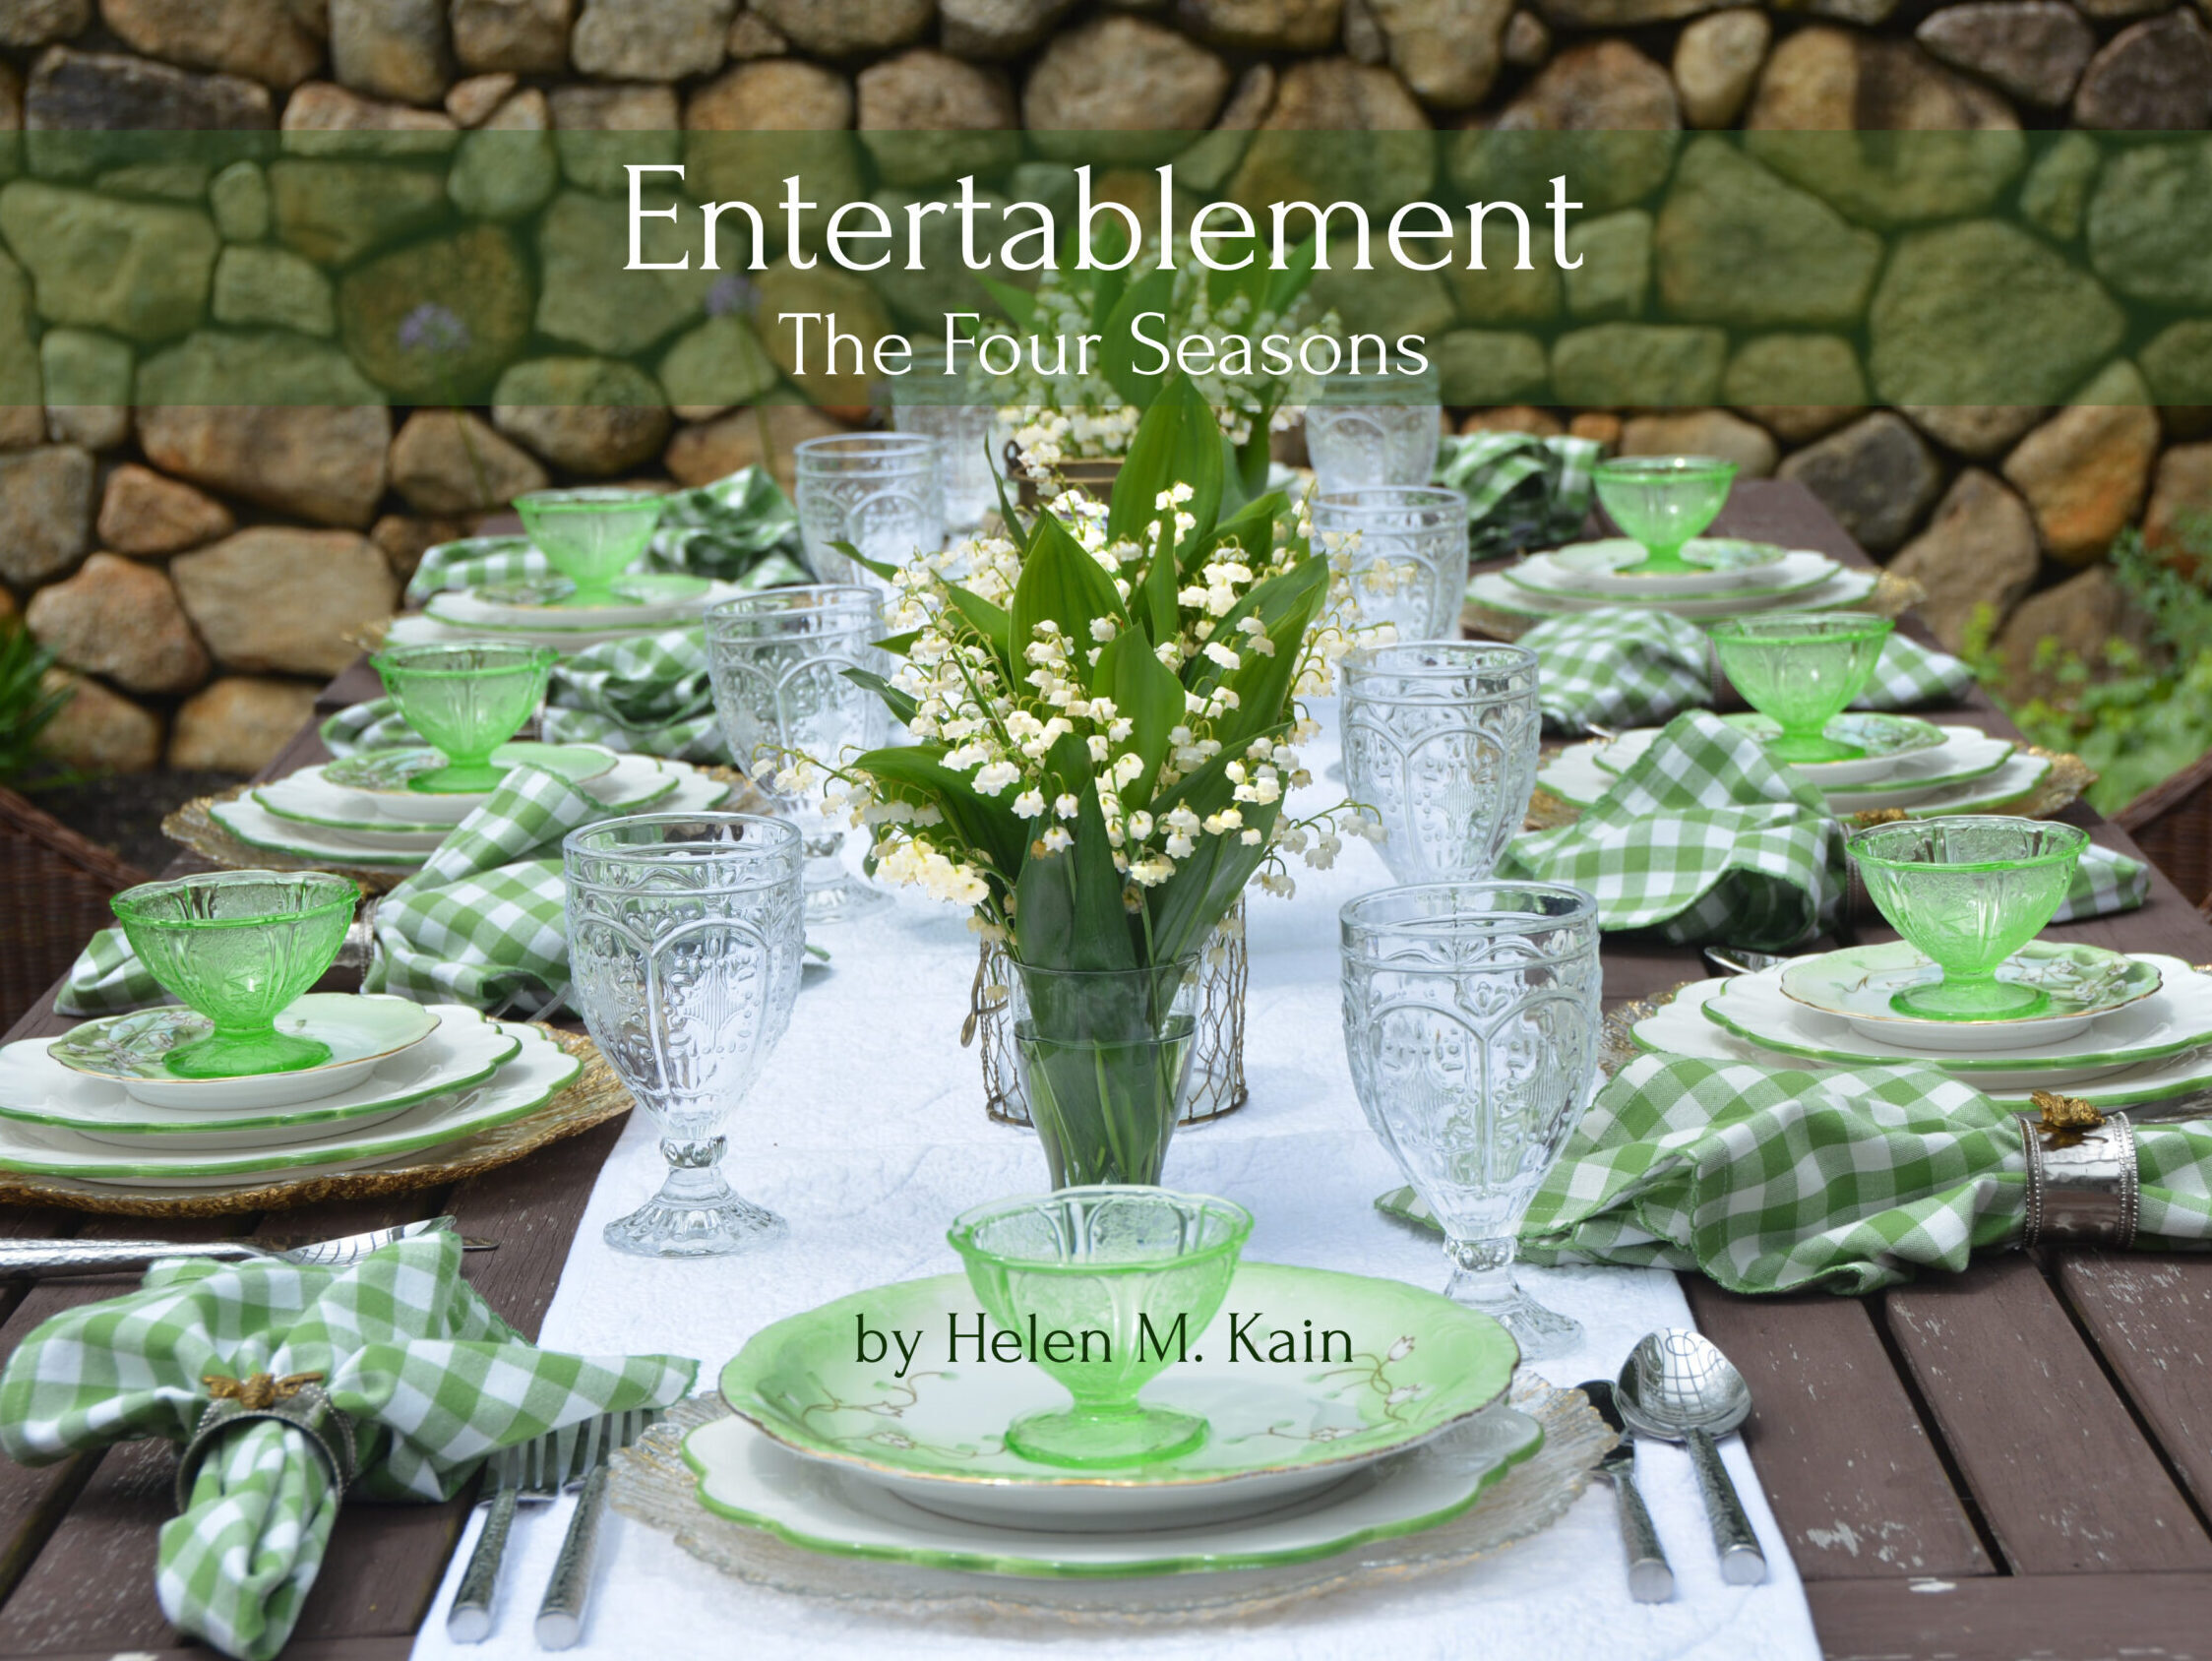 Entertablement – The Four Seasons is here!